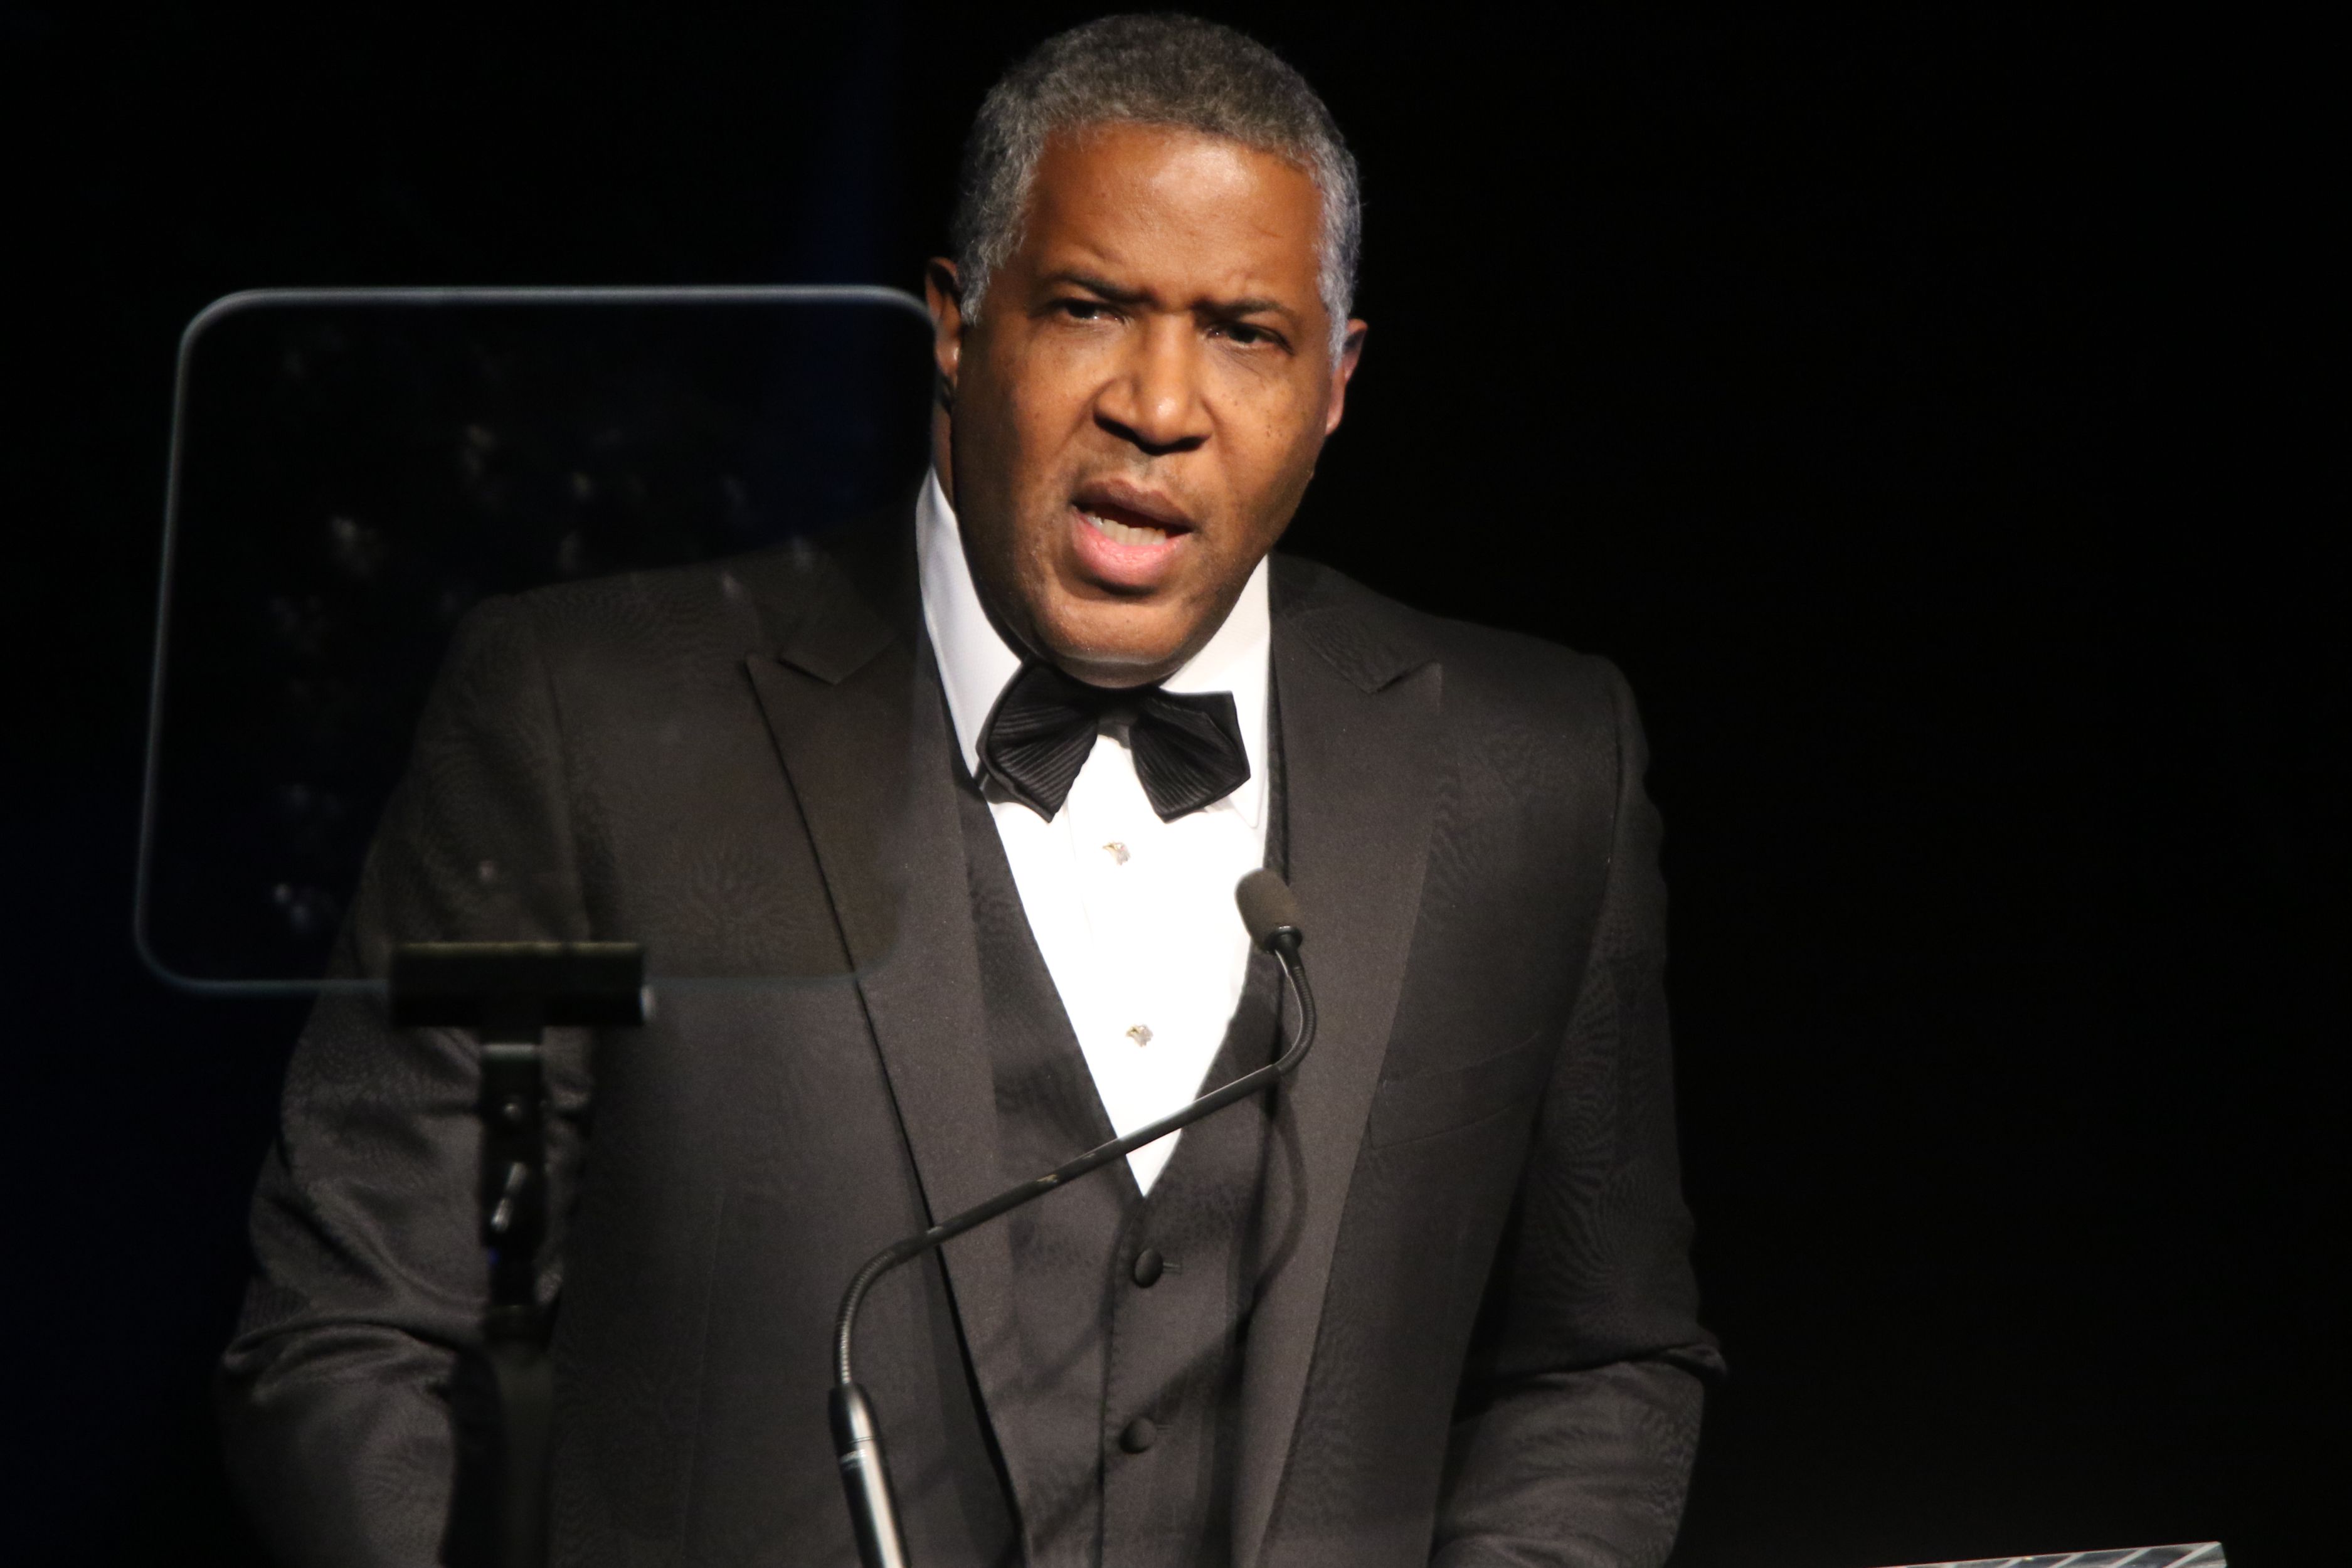 Chair of the Board of Robert F. Kennedy Human Rights, Robert F. Smith, speaks at the 2018 Ripple of Hope Gala in New York City. Wednesday, December 12, 2018